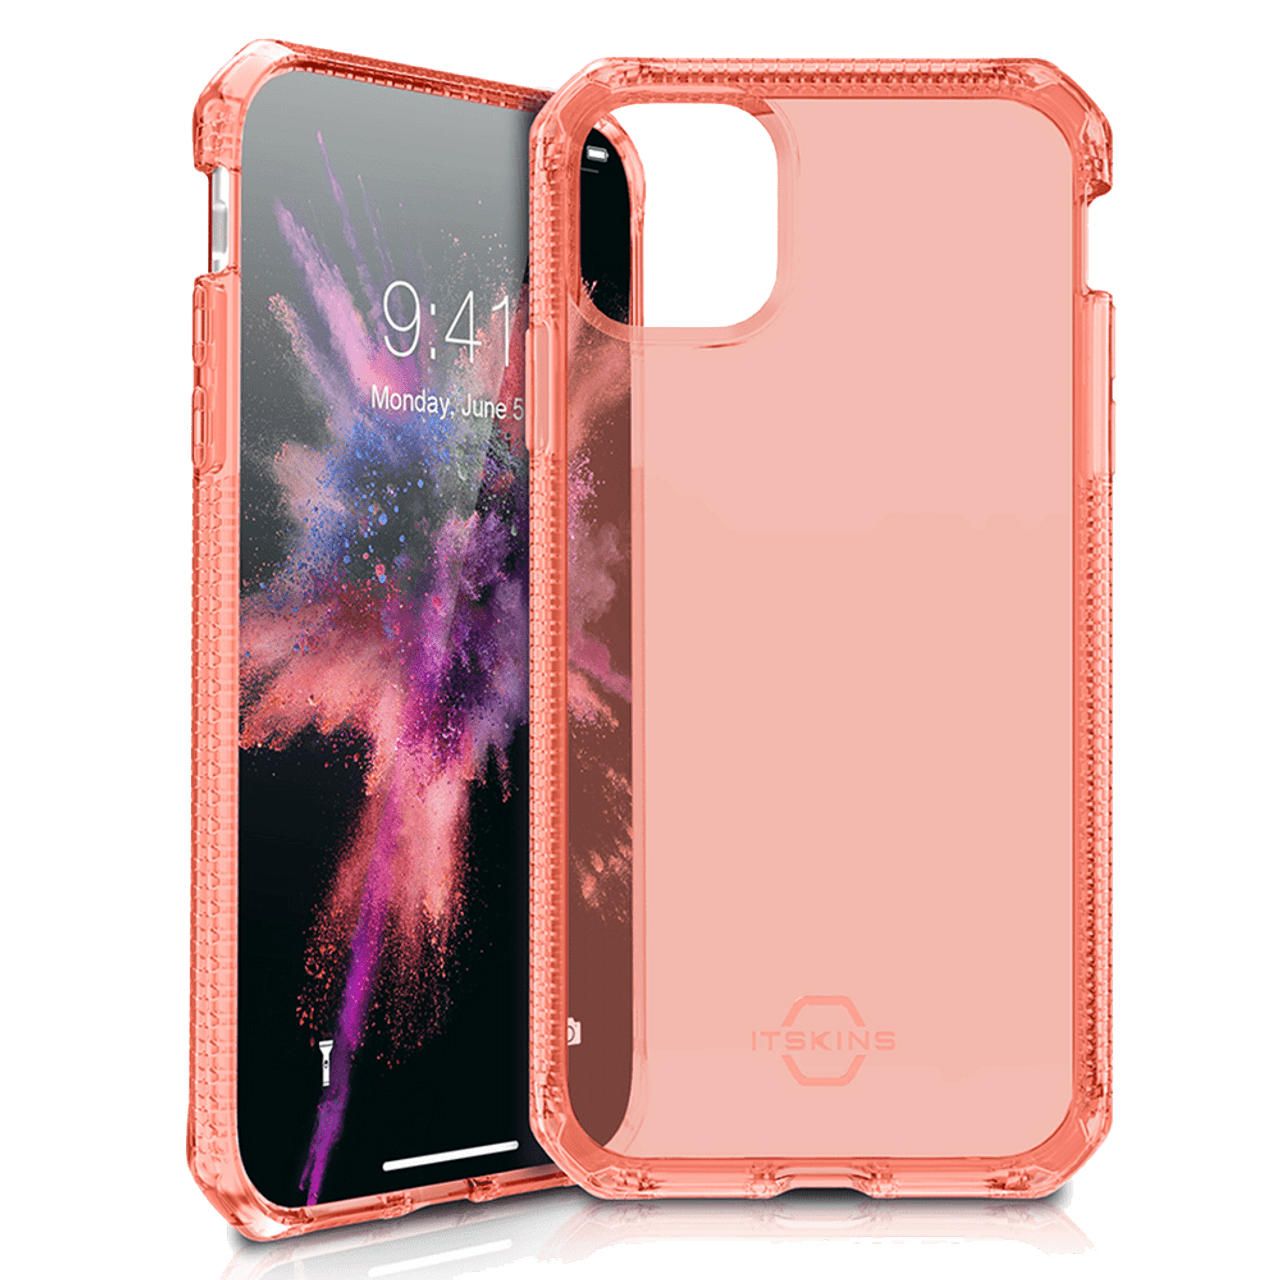 iPhone 11 Pro Max Case - Clear - Apple